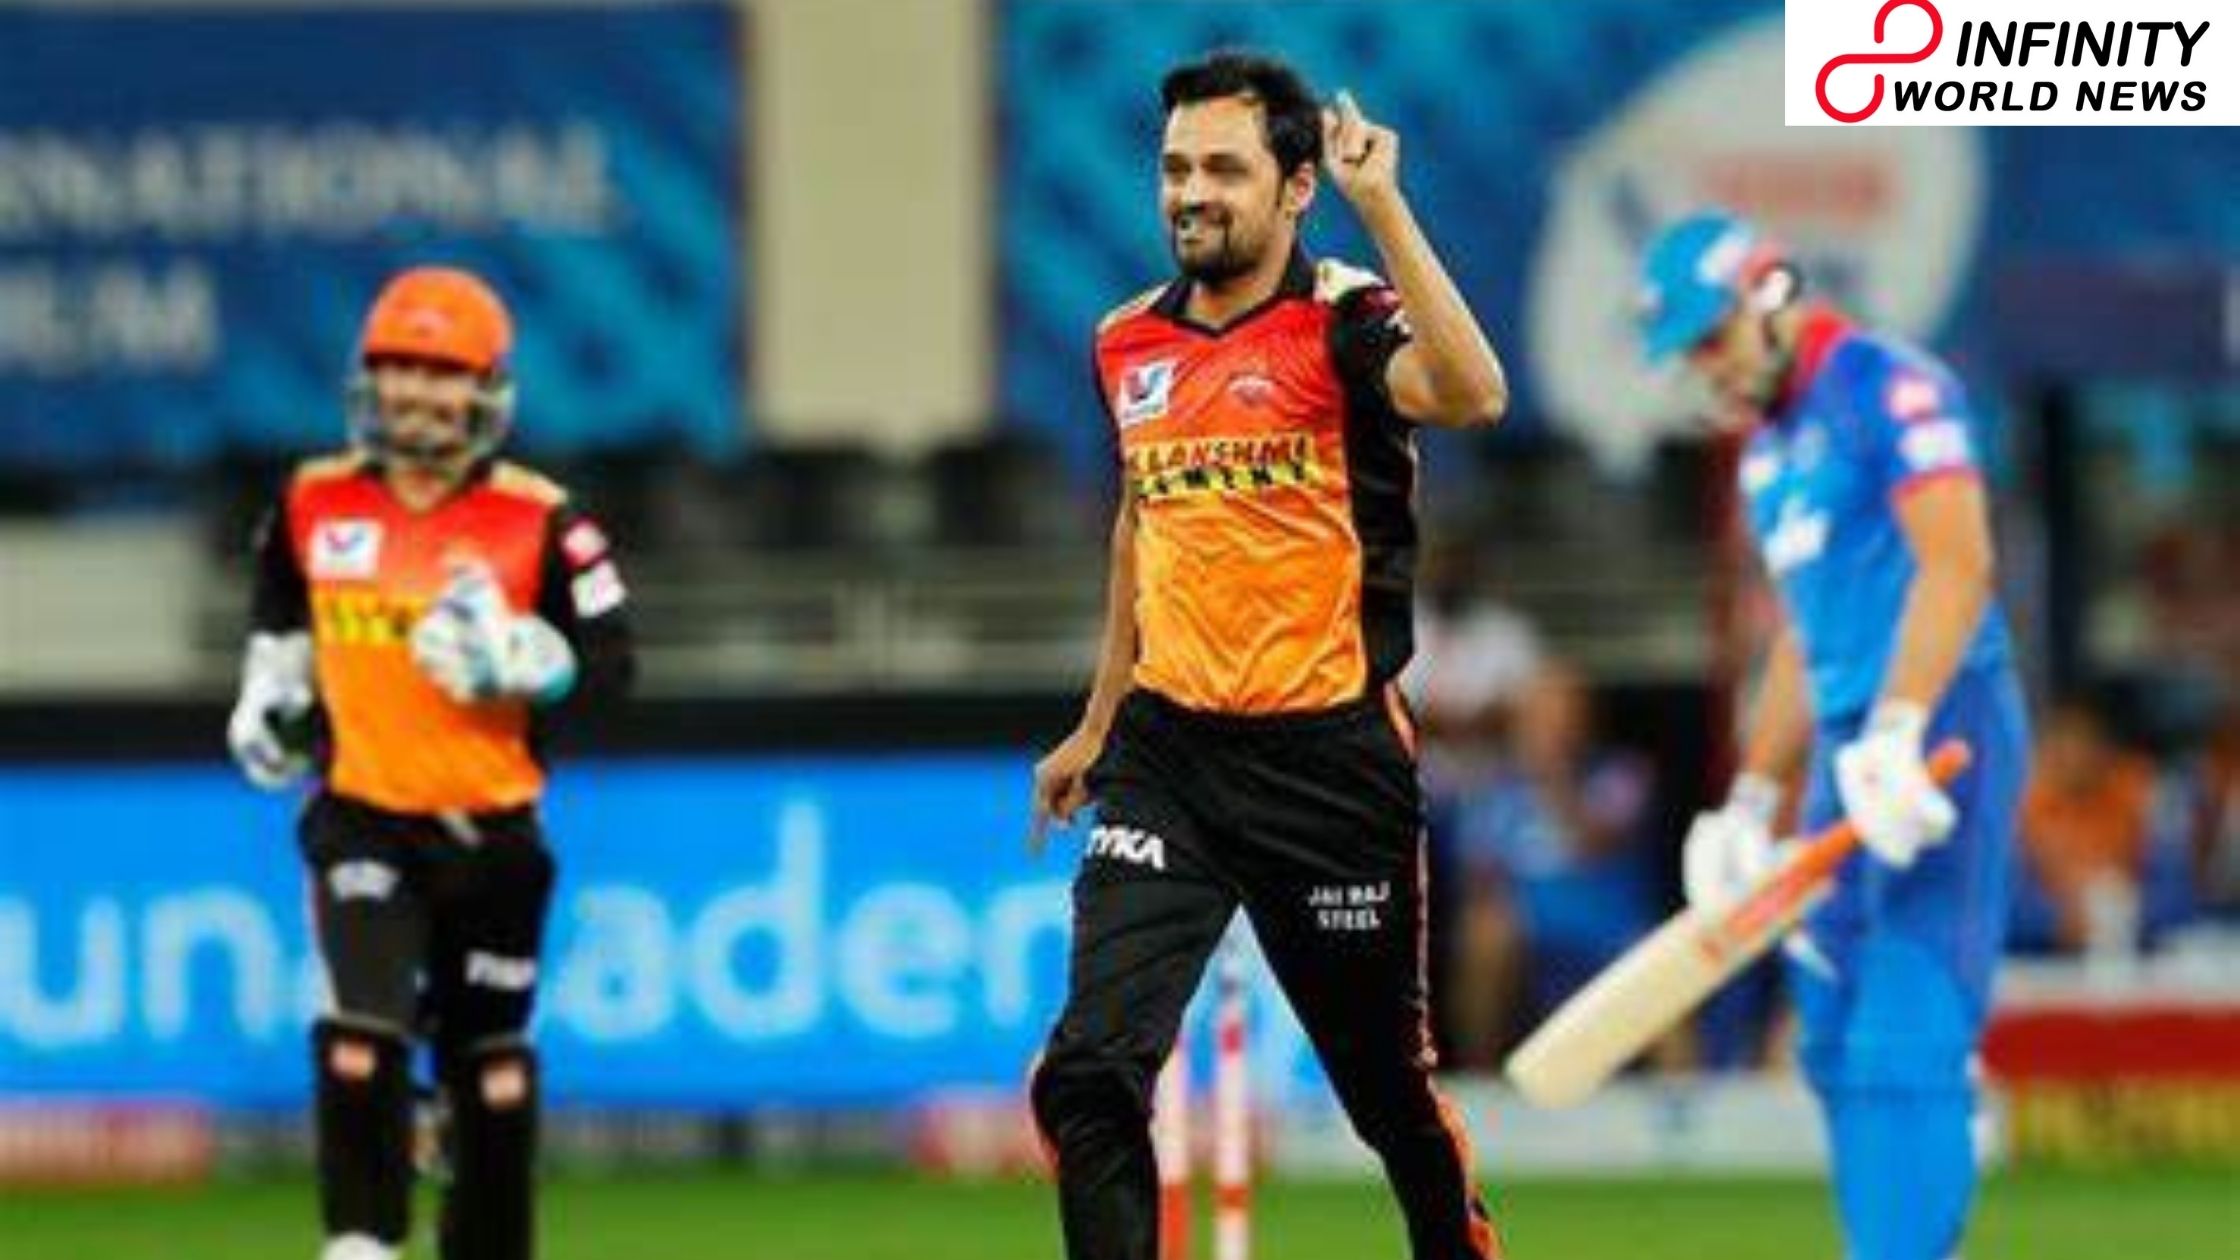 Shahbaz Nadeem NetWorth, Dream11 IPL Salary, Age Also Personal Life Of Hyderabad Spinner